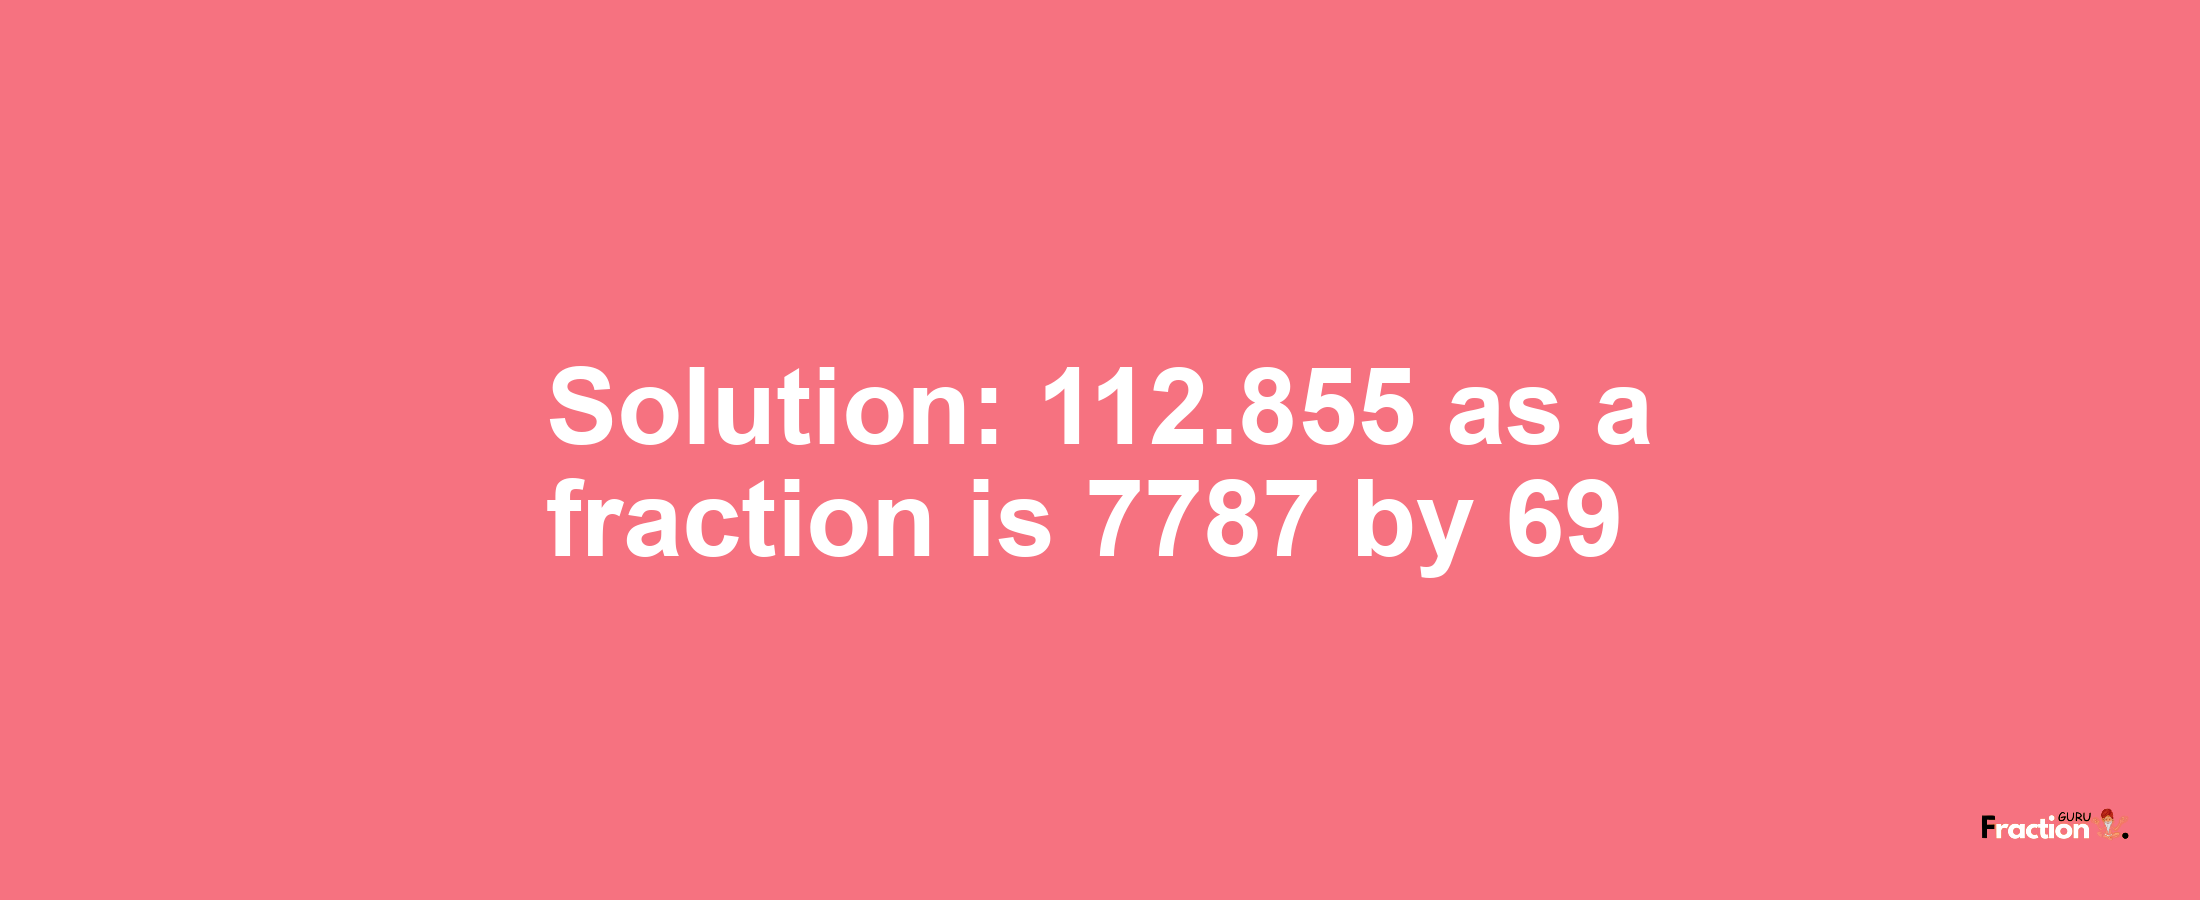 Solution:112.855 as a fraction is 7787/69